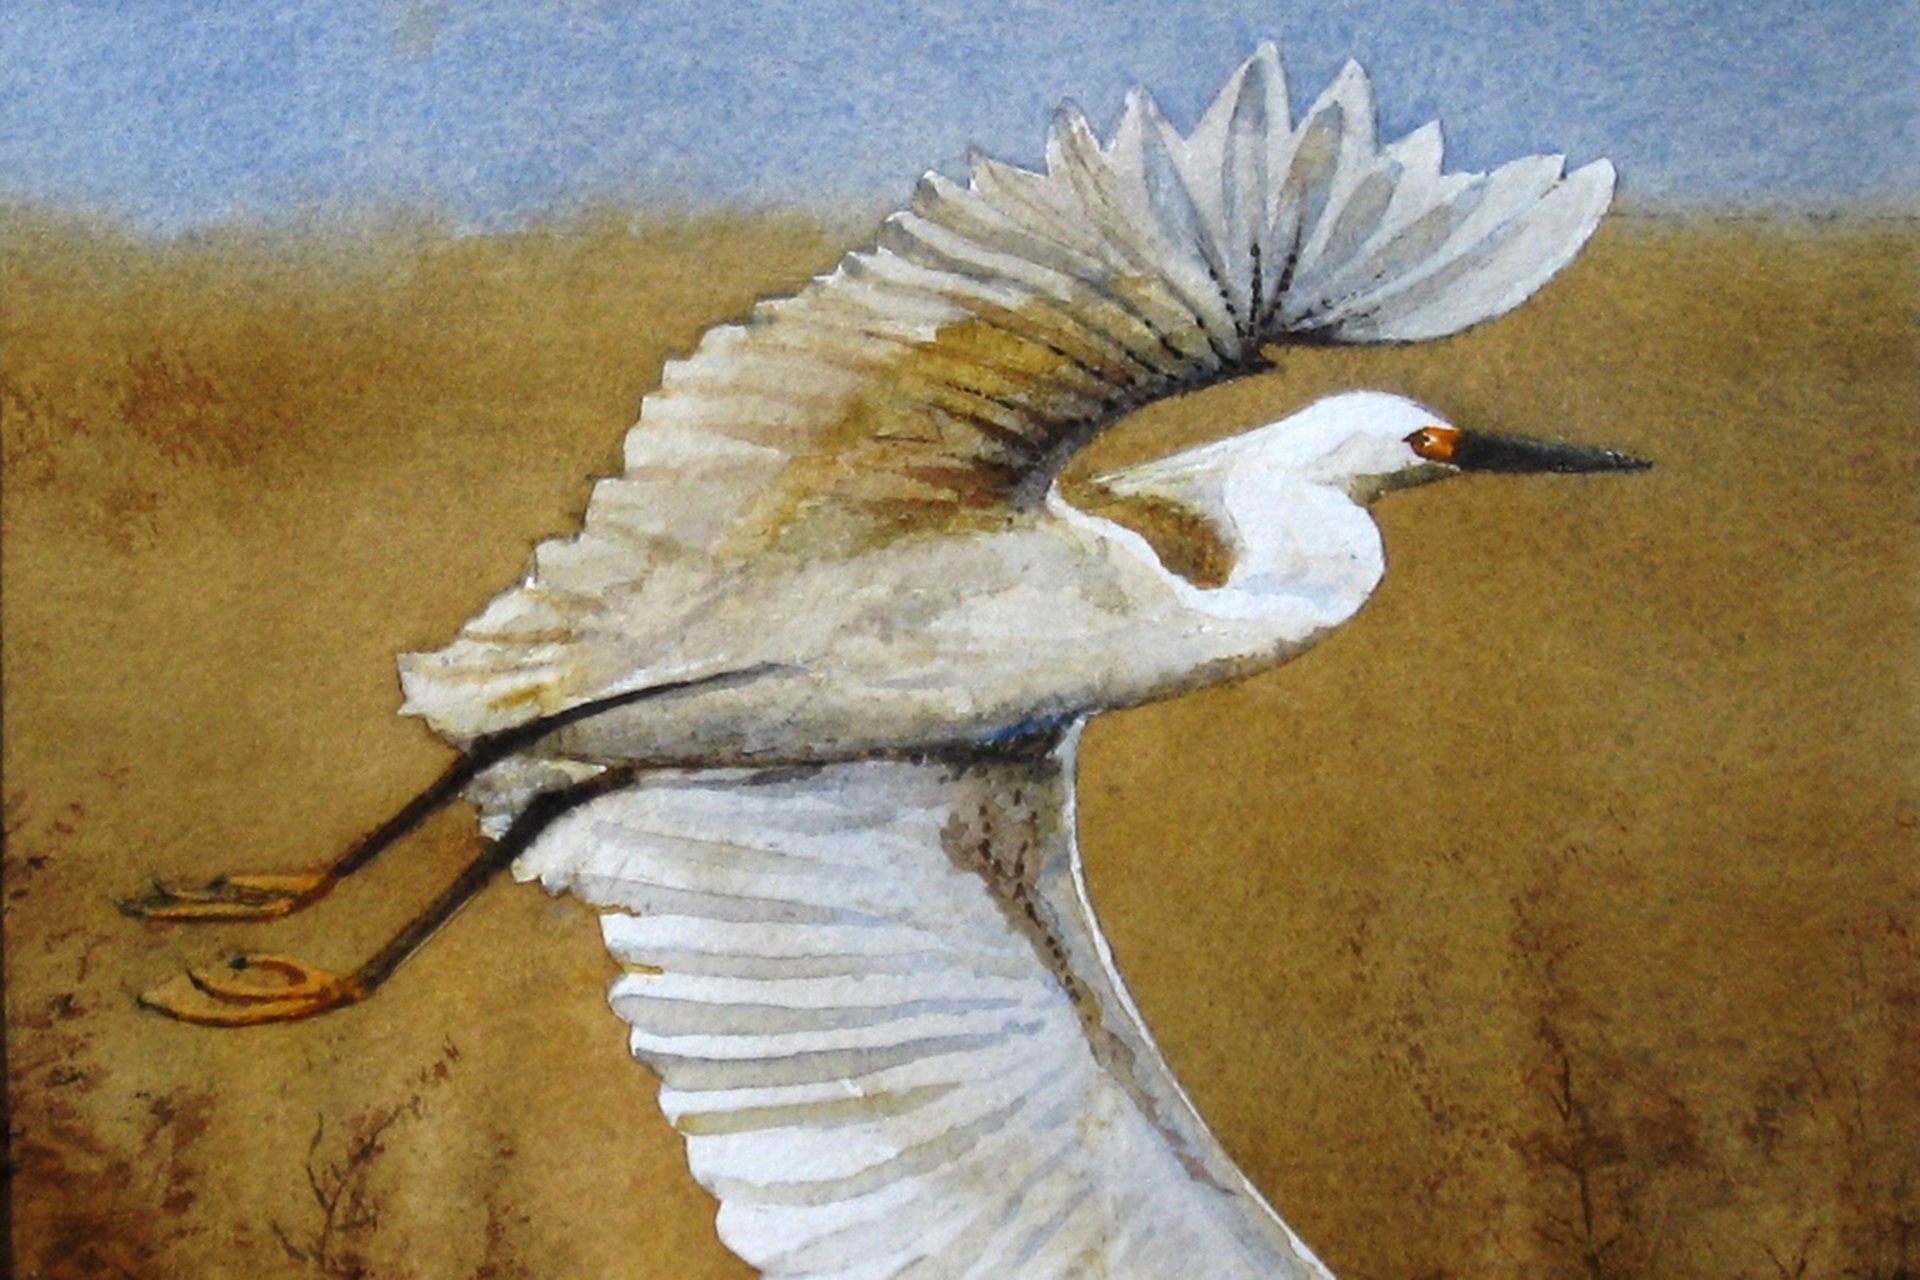 Cropped portion of a watercolor painting depicting an egret in flight